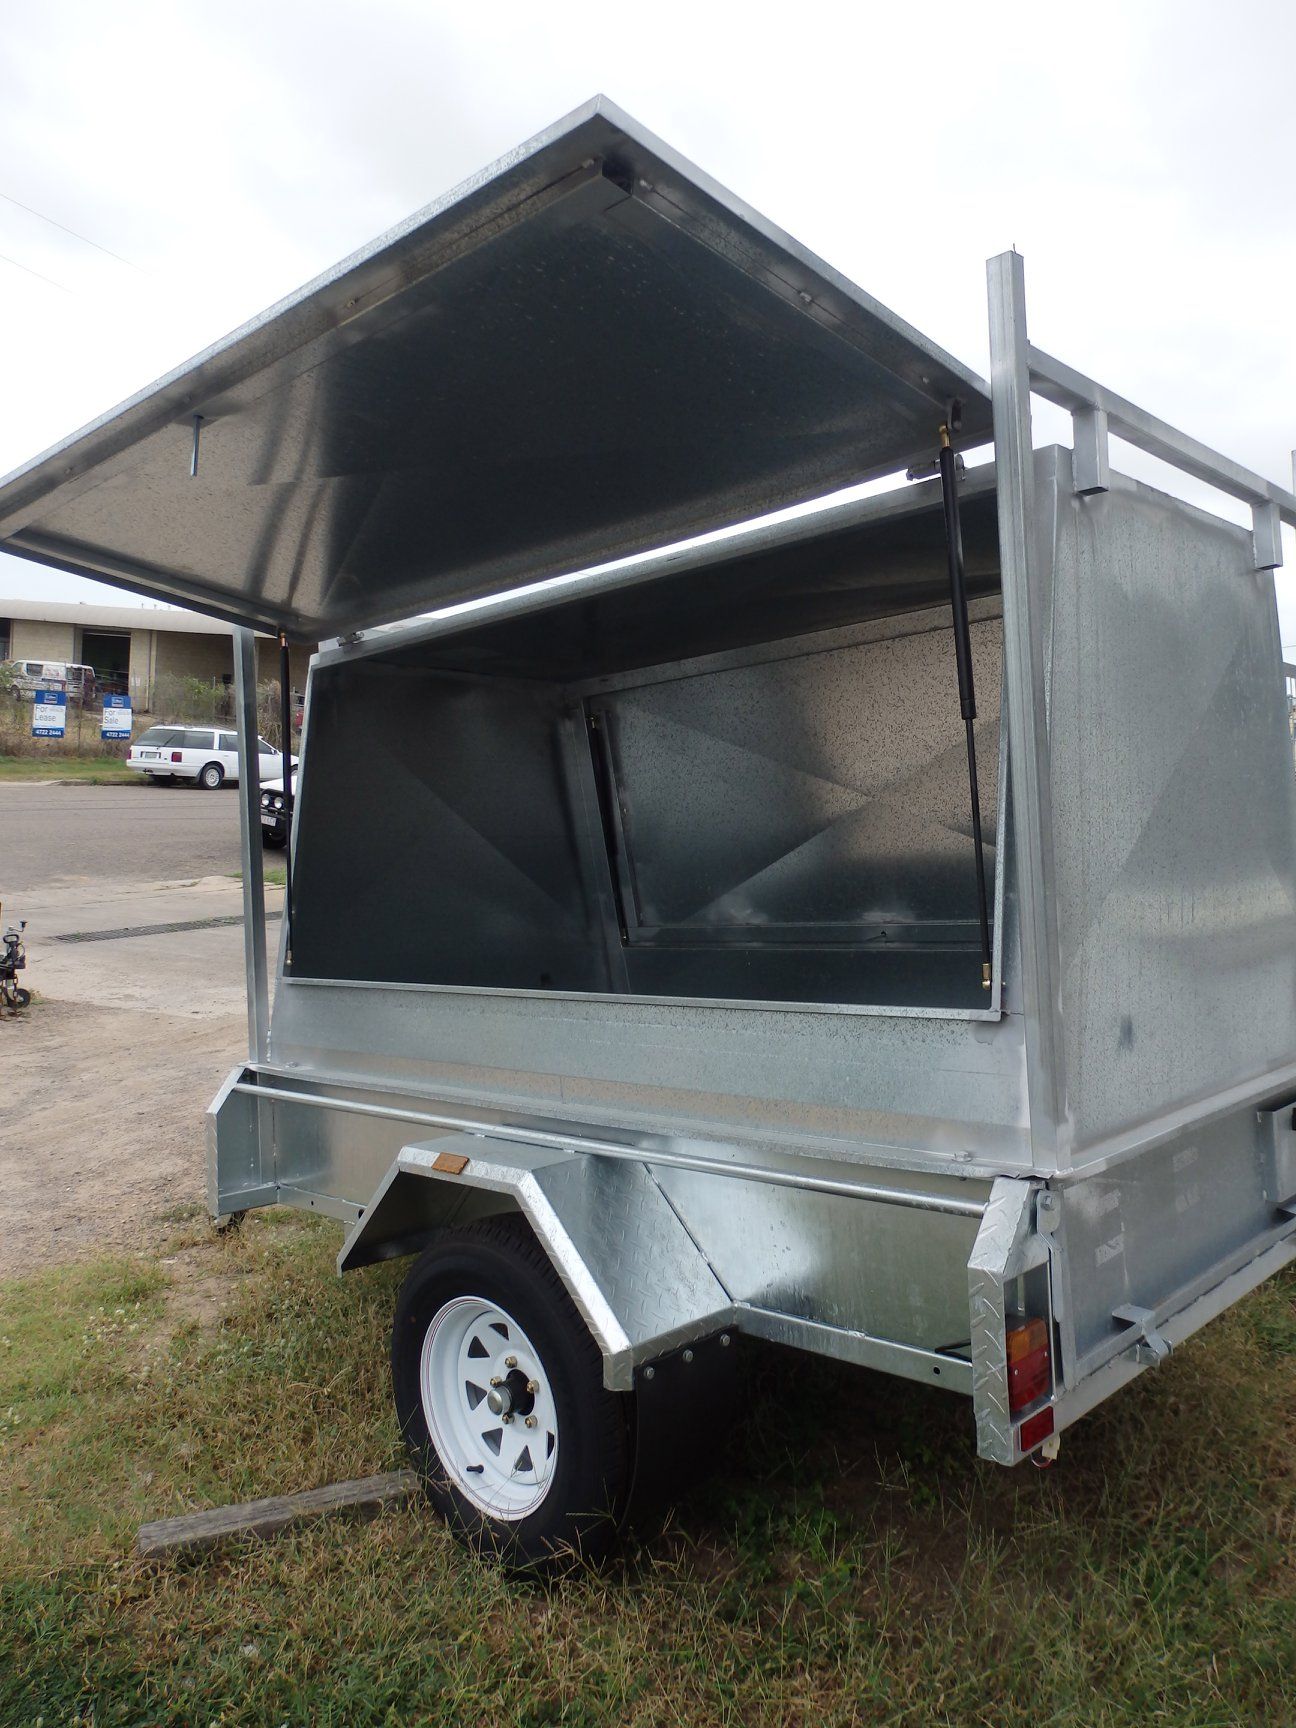 Hot-dipped Galvanised Trailers — Budget Trailers in Garbutt, QLD